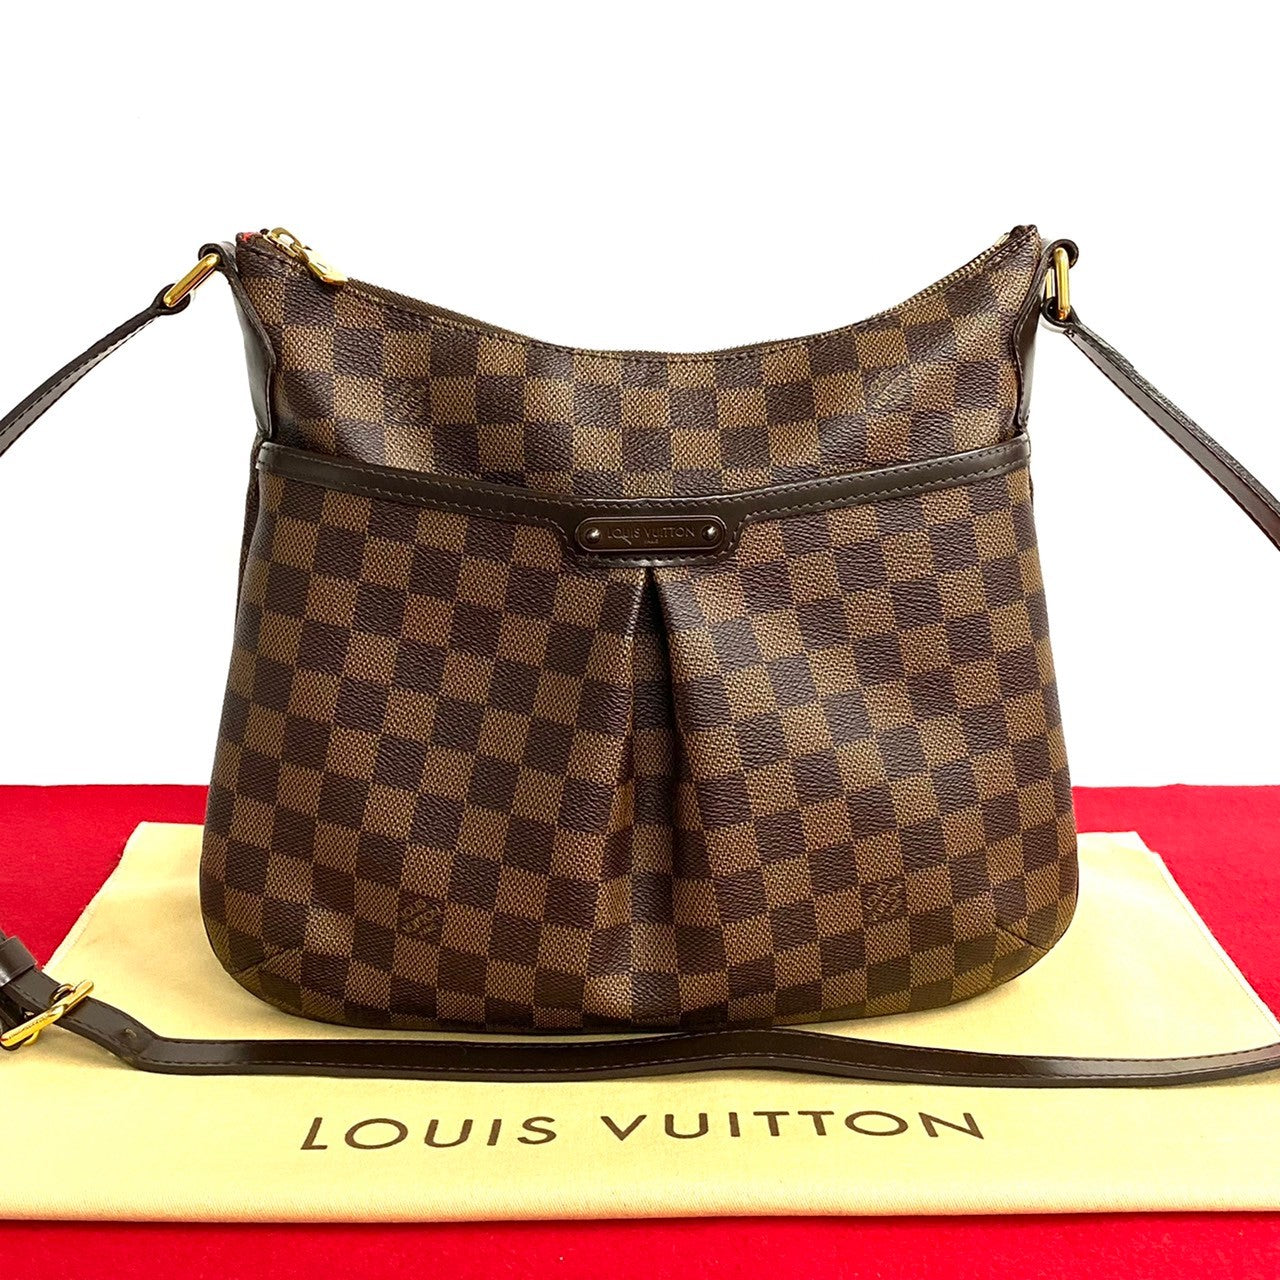 Louis Vuitton Bloomsbury PM Canvas Crossbody Bag N42251 in Good condition